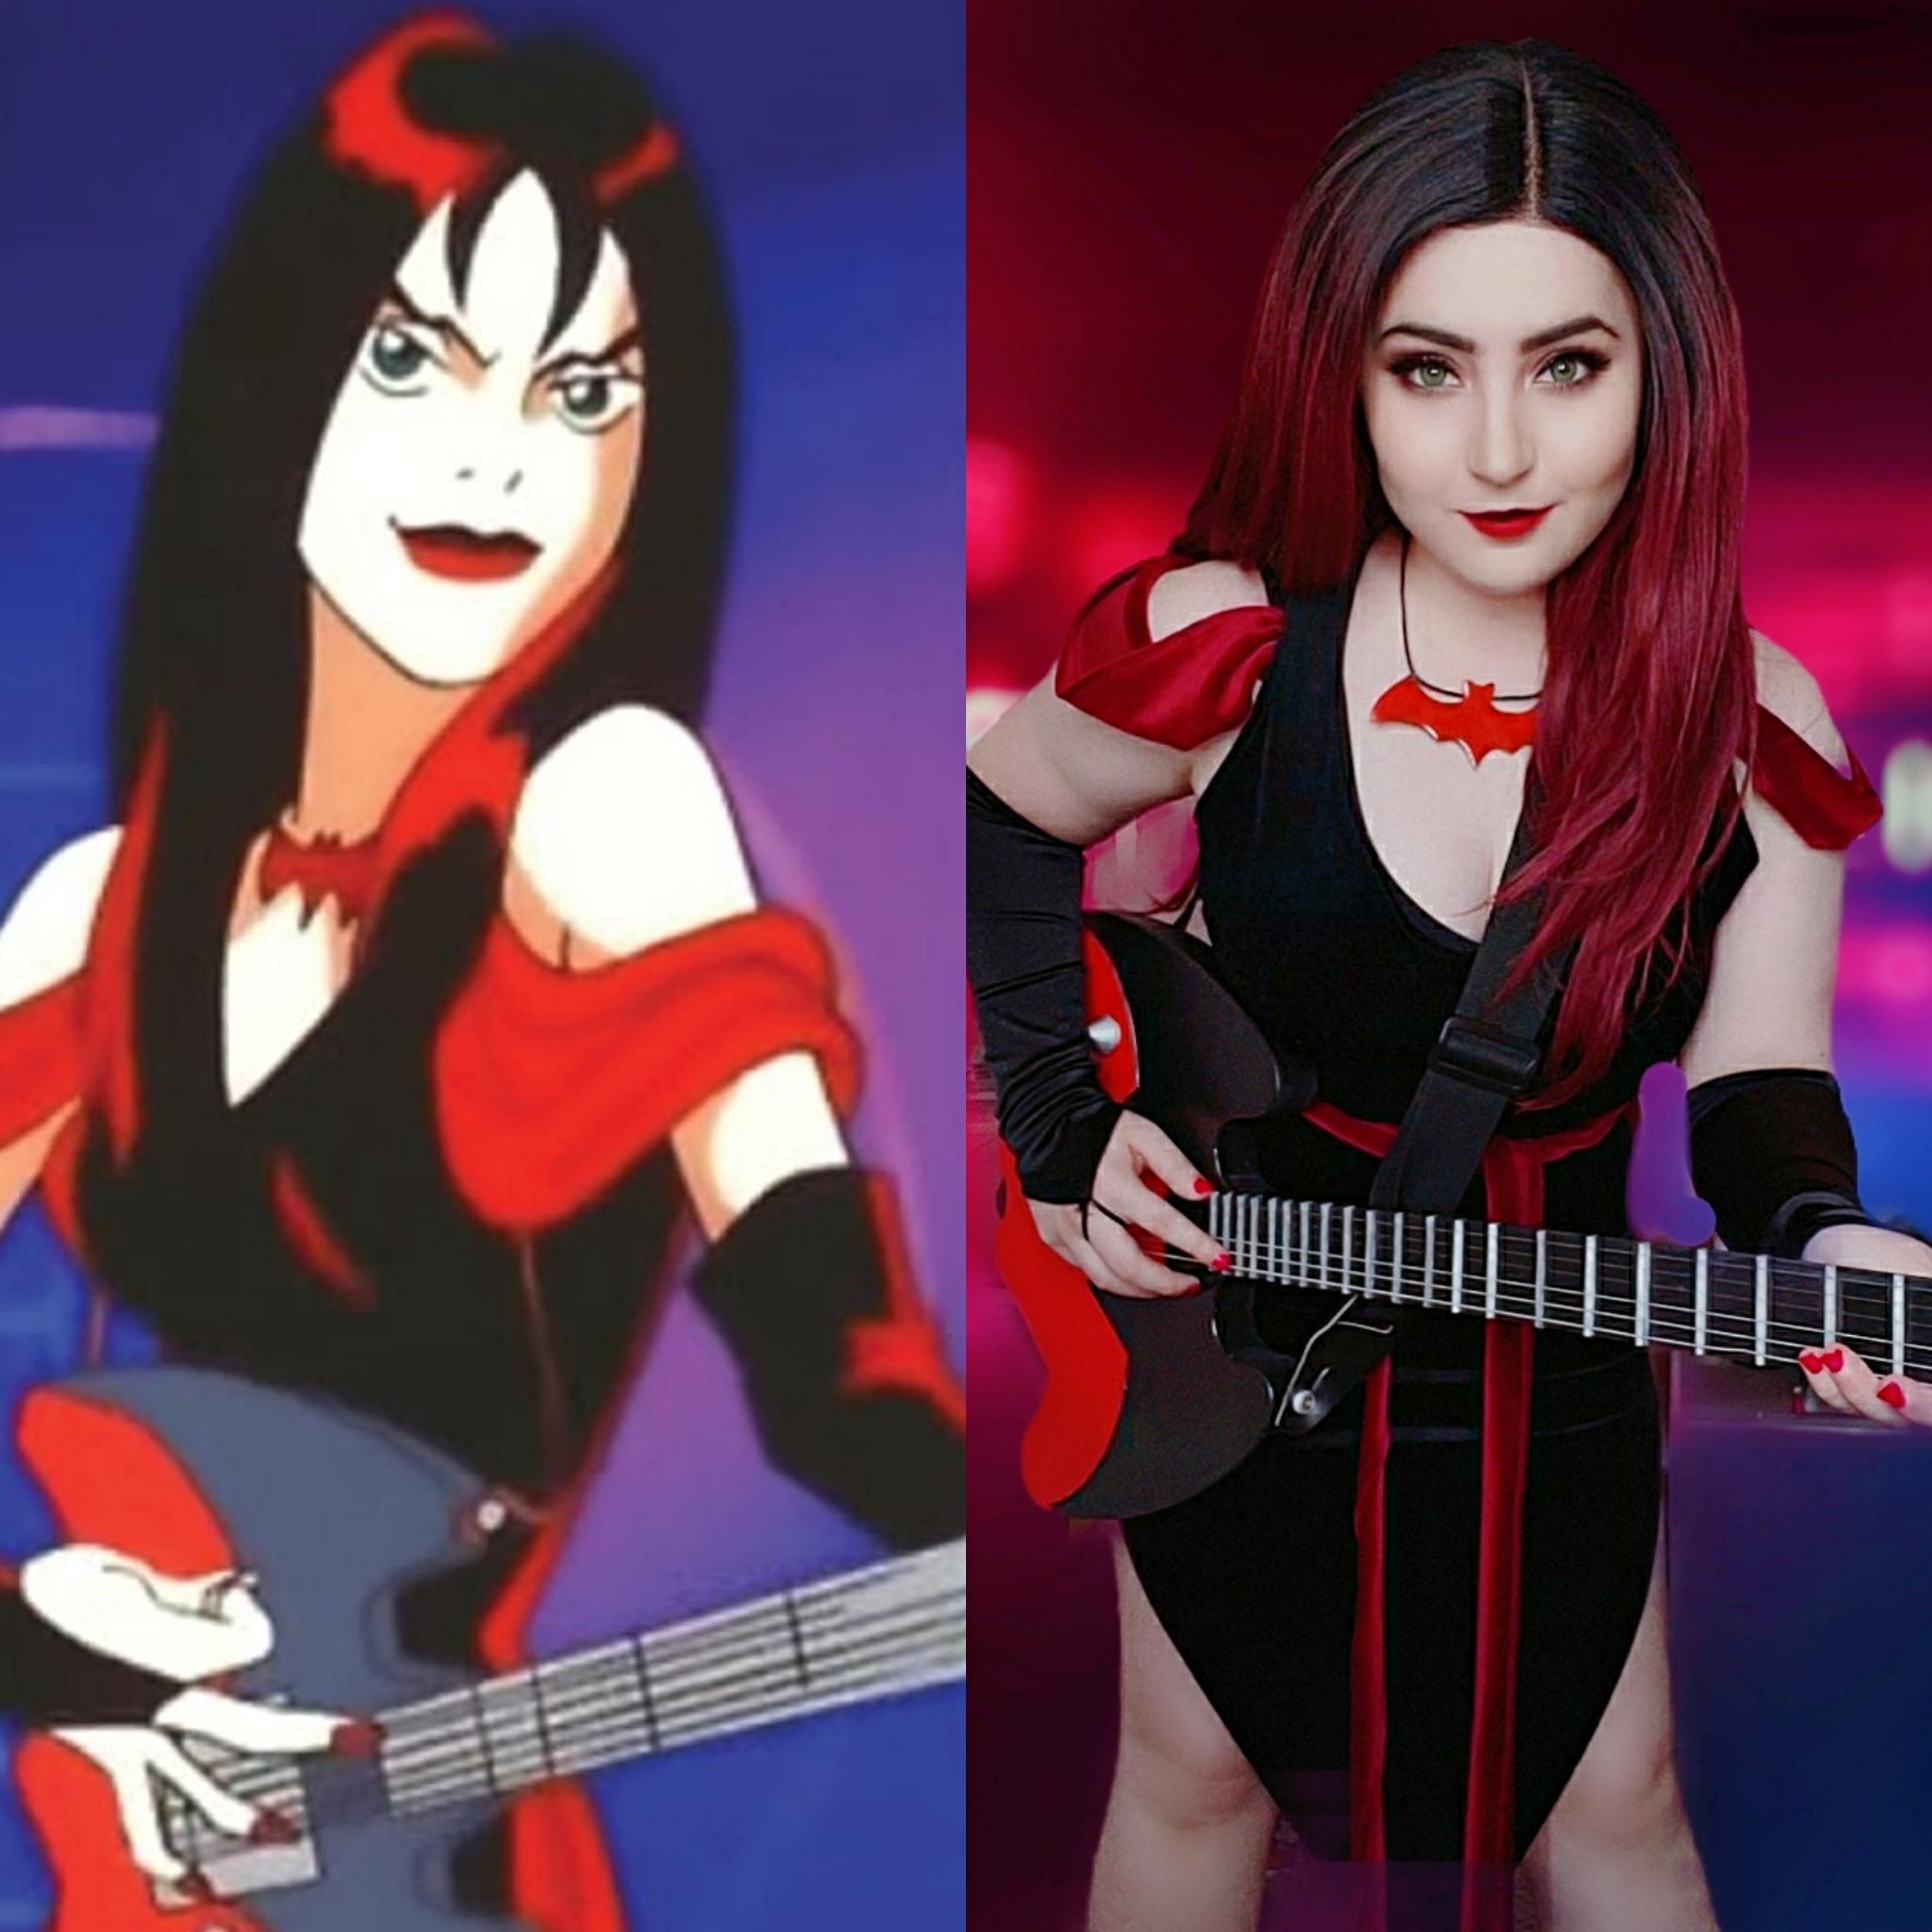 View Thorn from The Hex Girls (Scooby Doo) cosplay by karamcosplay for free  | Simply-Cosplay